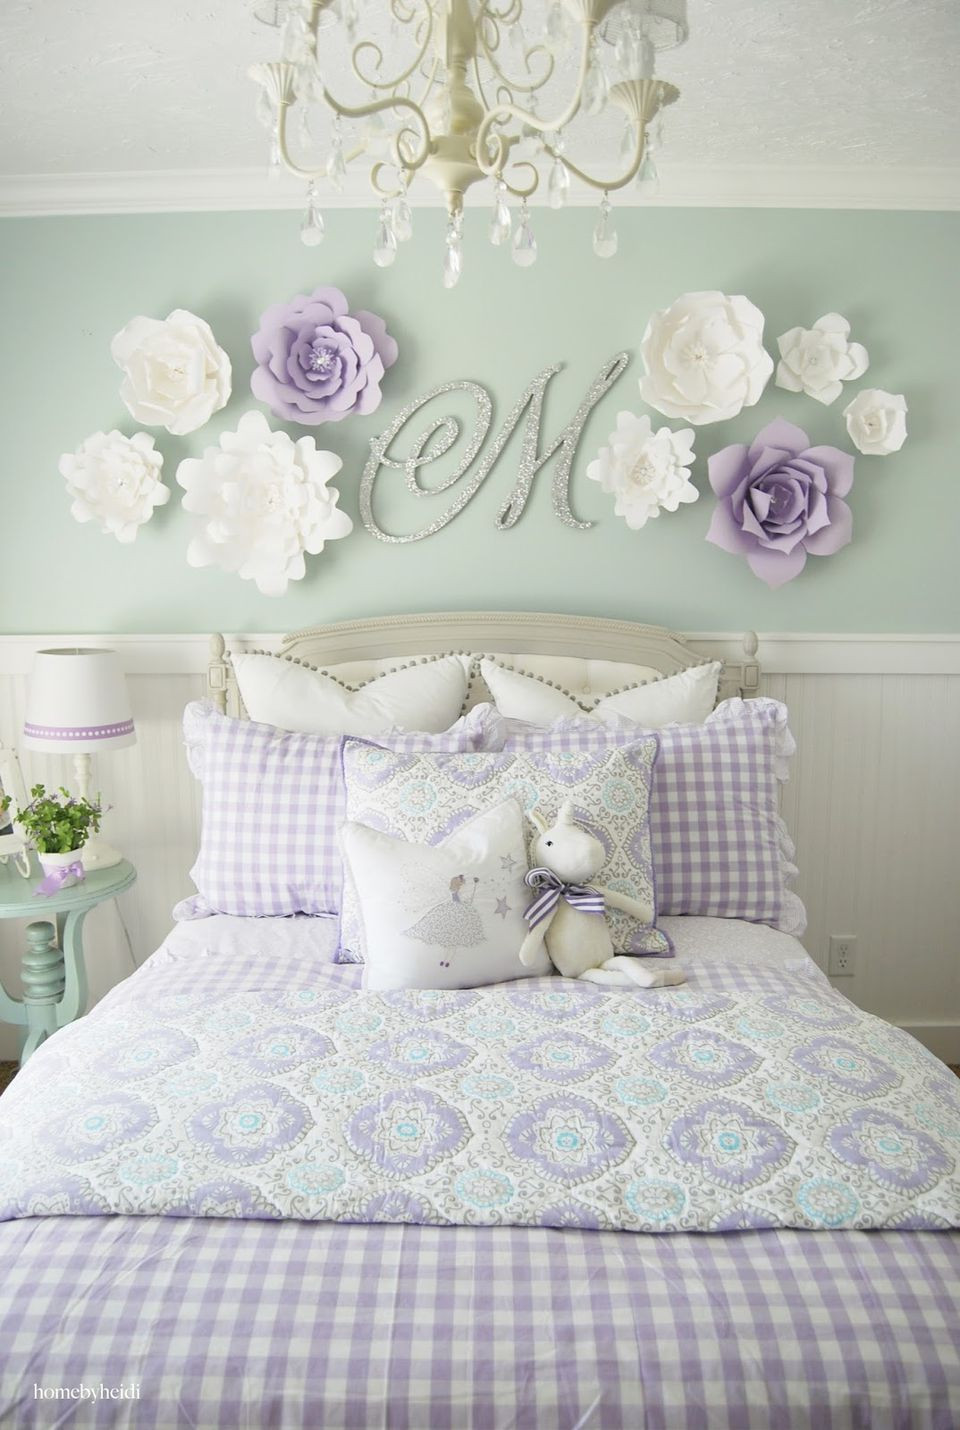 Girls Bedroom Wall Decor
 24 Wall Decor Ideas for Girls Rooms